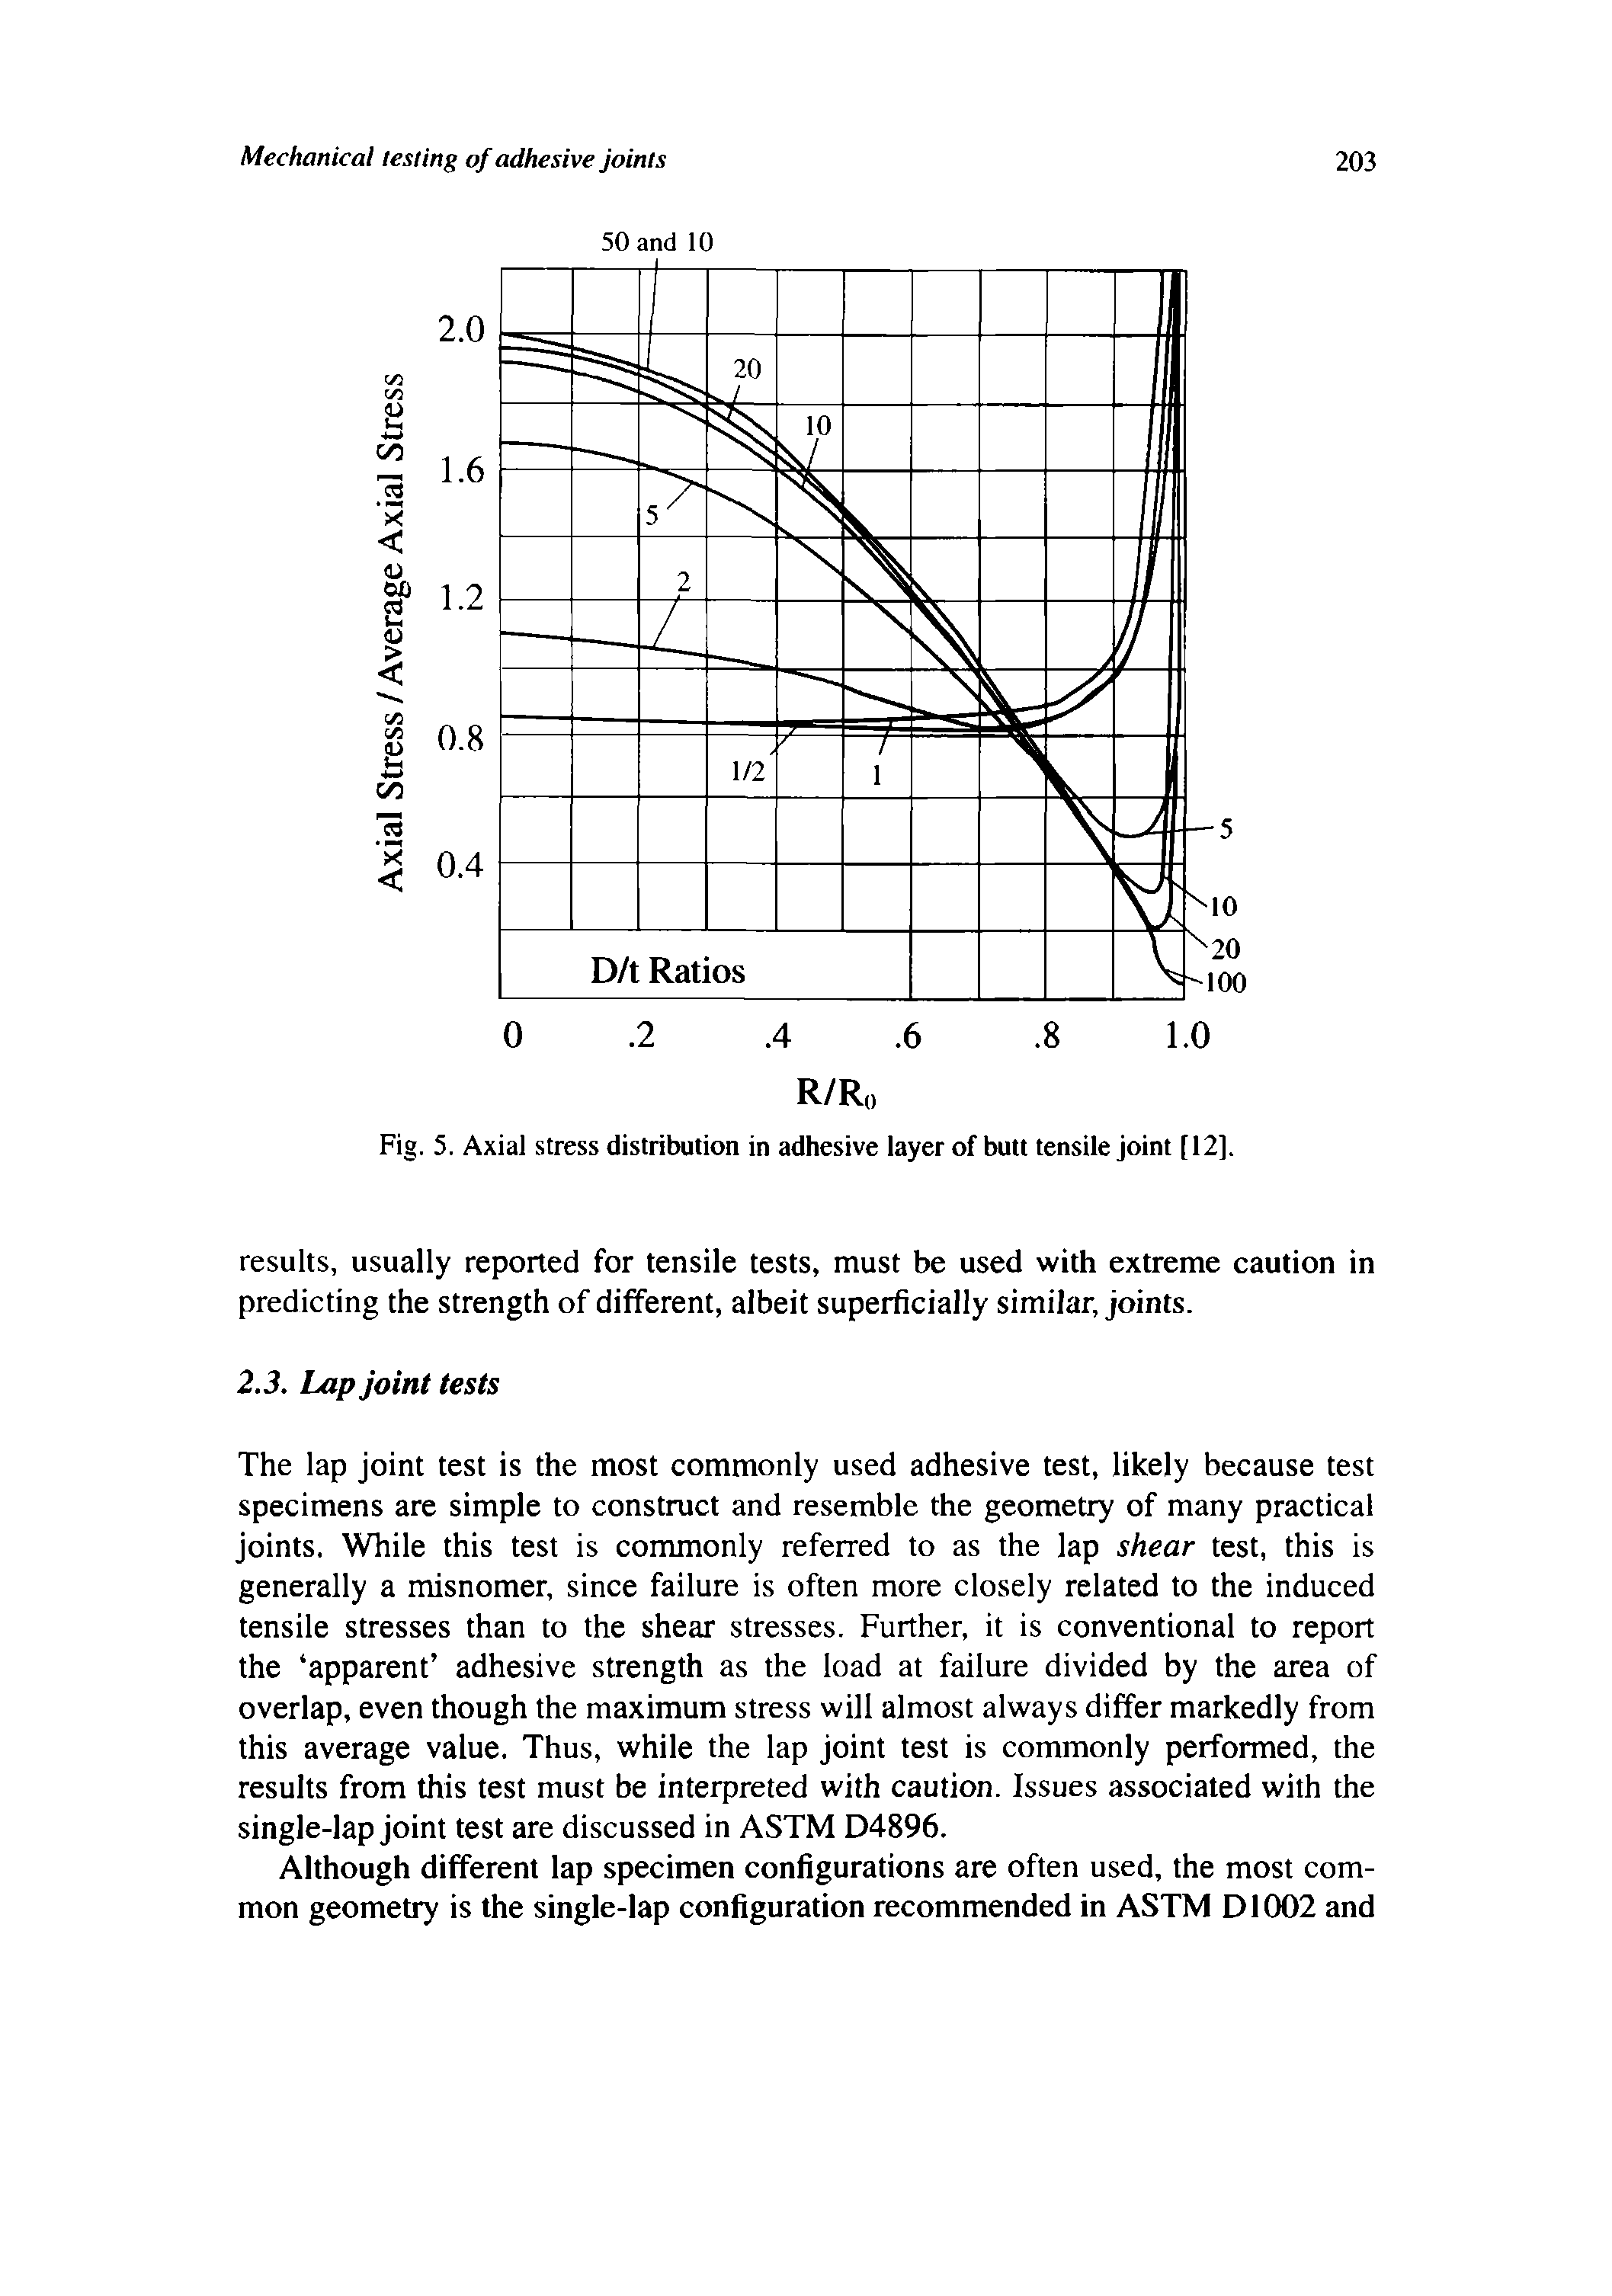 Fig. 5. Axial stress distribution in adhesive layer of butt tensile joint [12],...